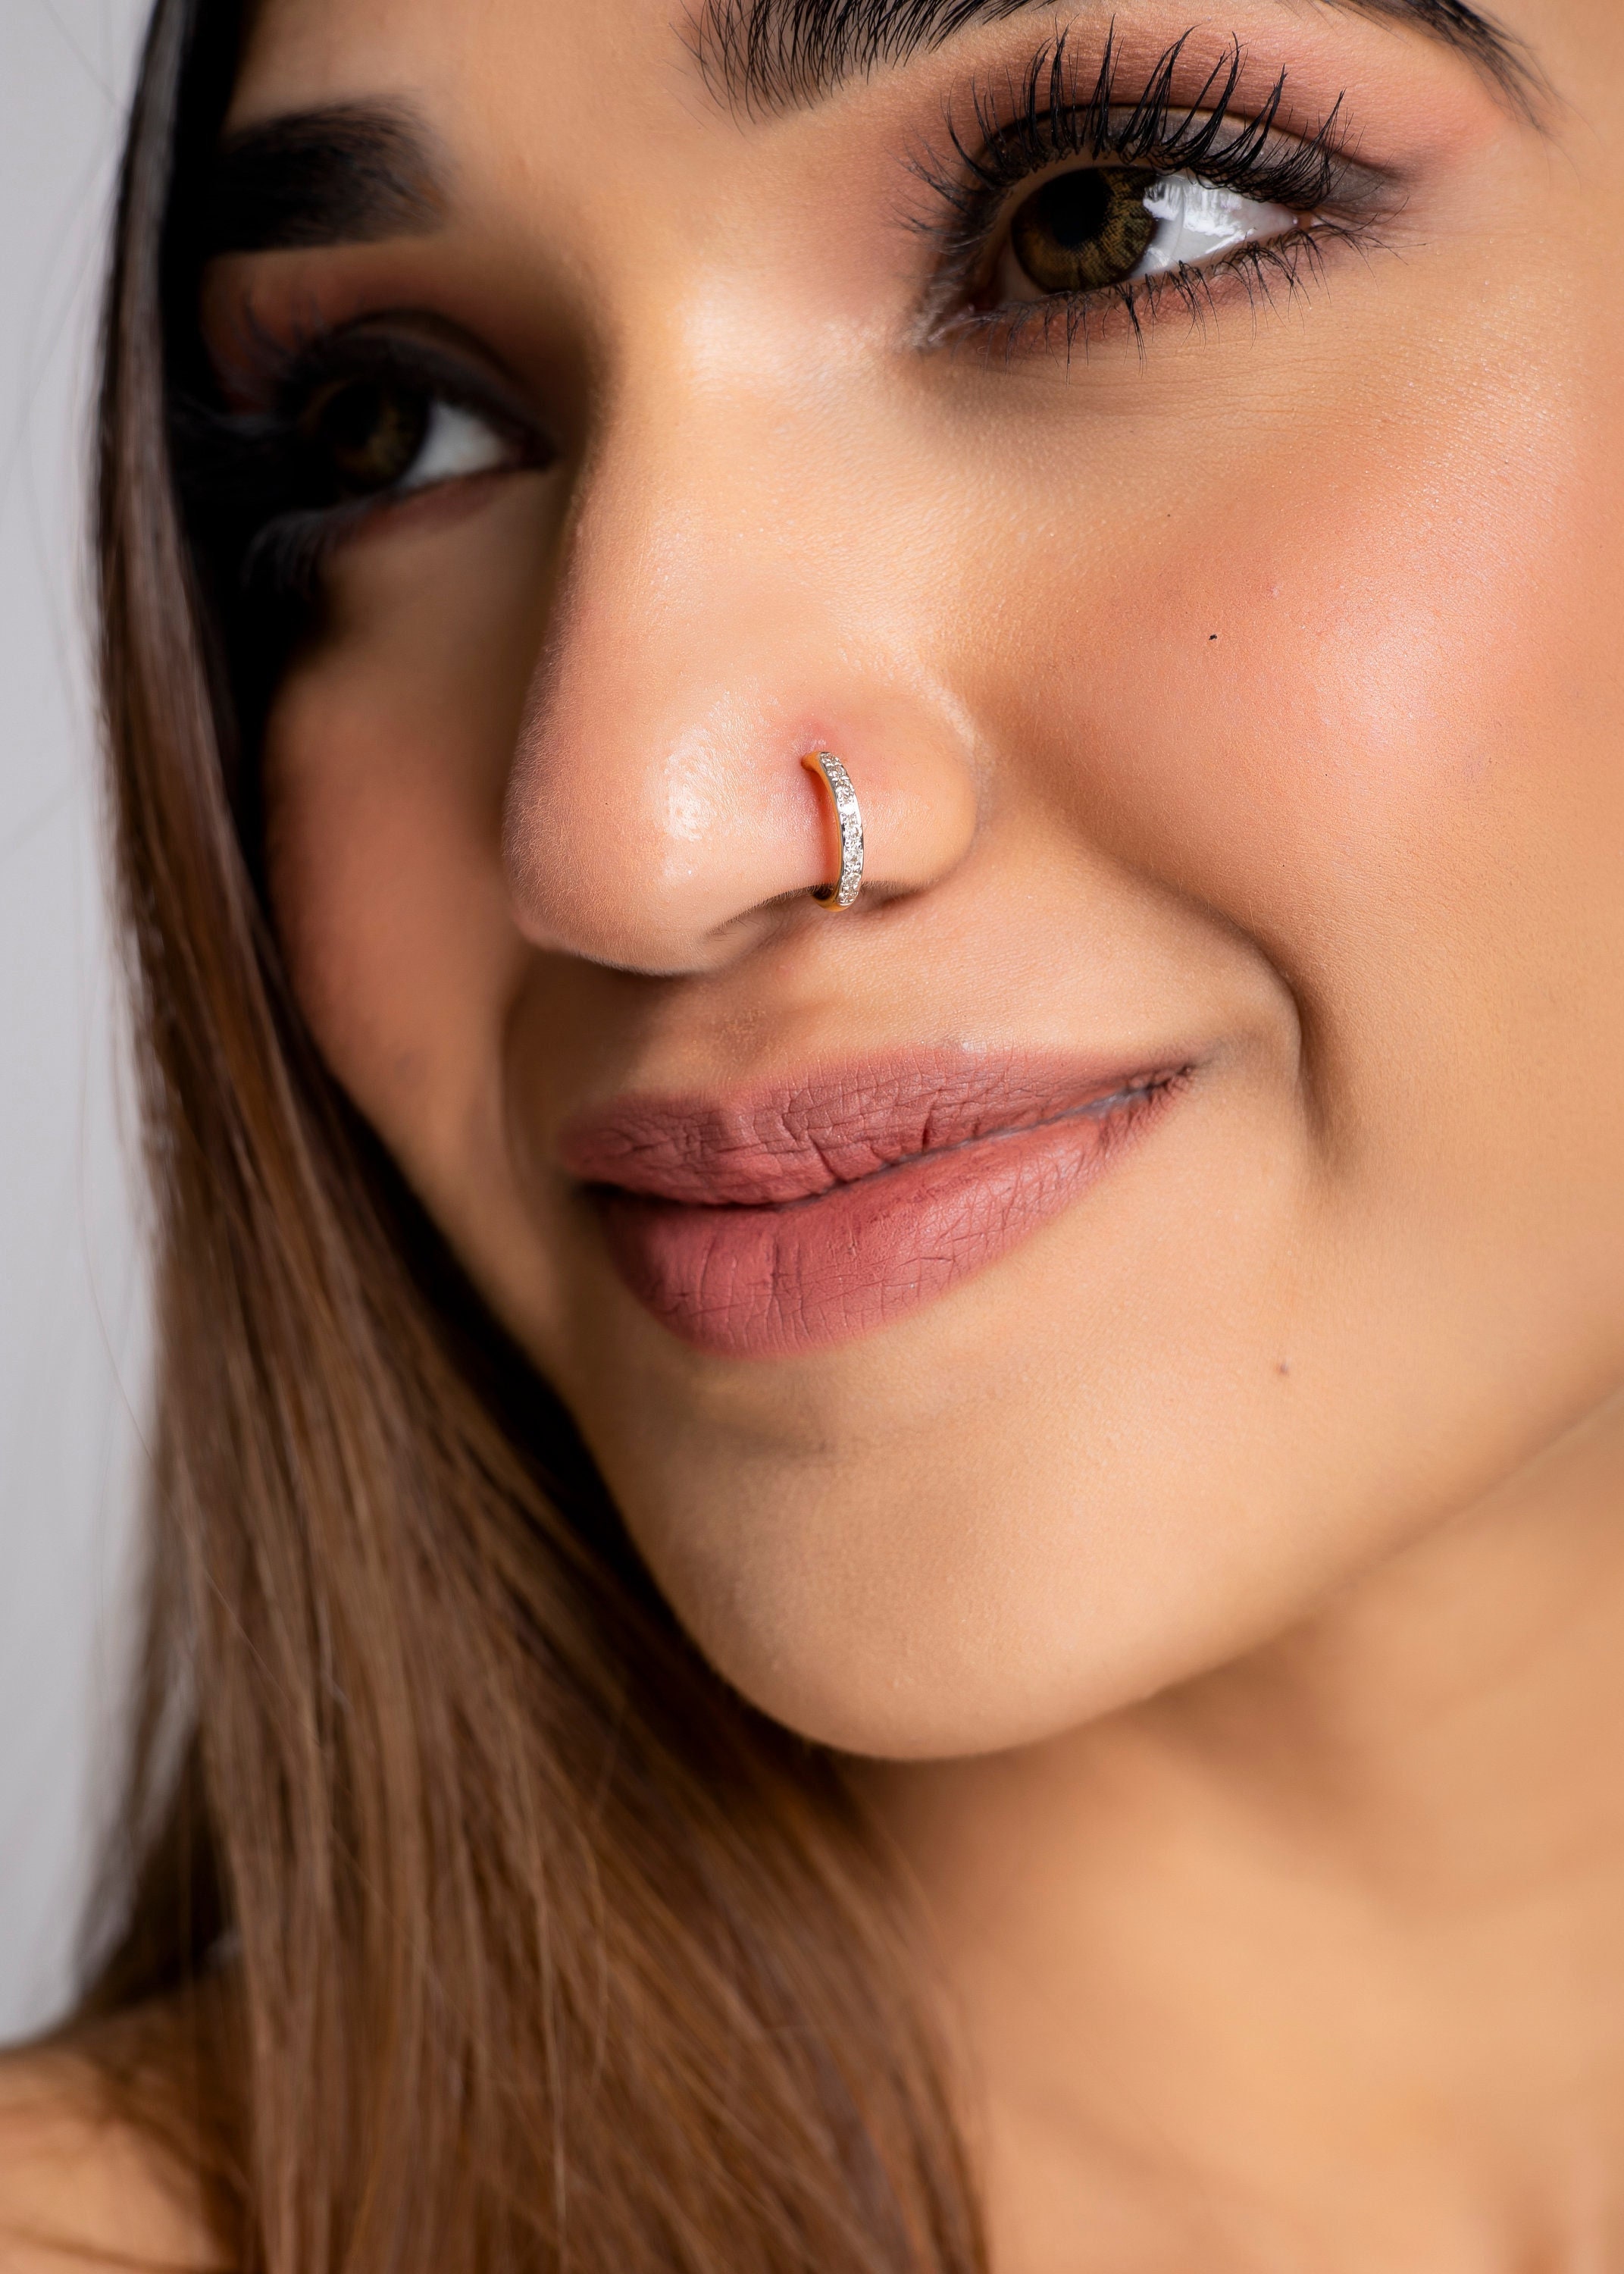 Unique Nose Rings At Low Prices Online | UrbanBodyJewelry.com